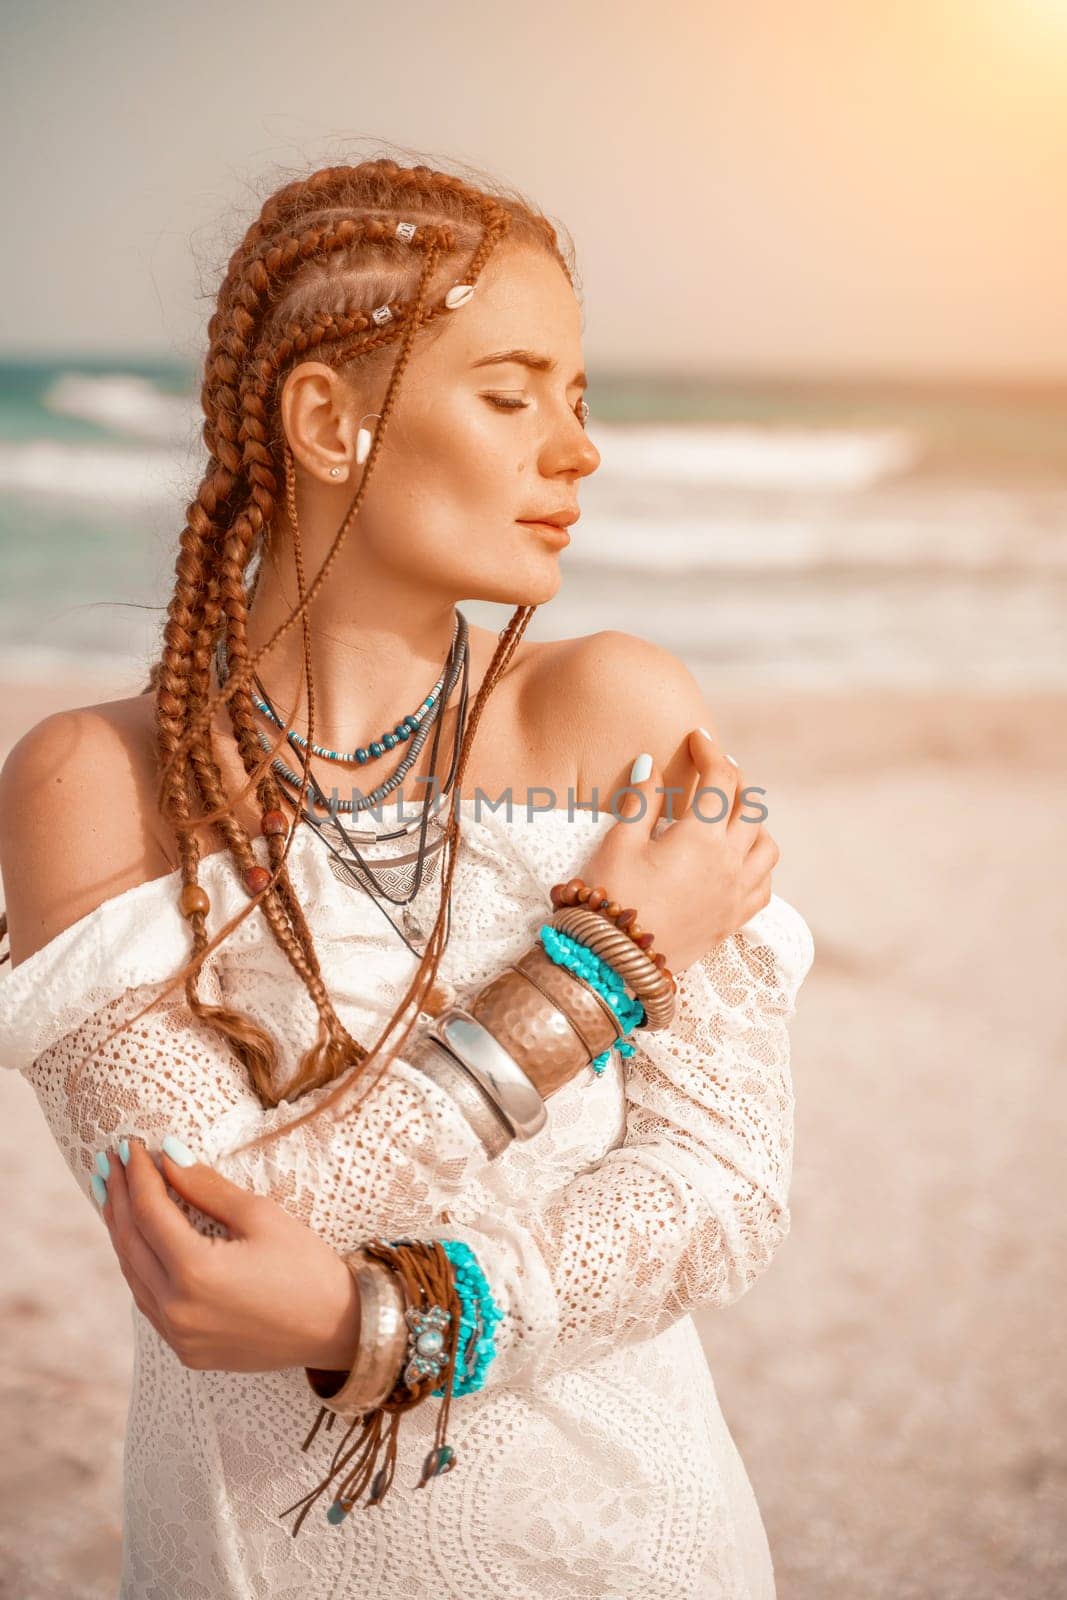 Woman portret sea white dress. Model in boho style in a white long dress and silver jewelry on the beach. Her hair is braided, and there are many bracelets on her arms